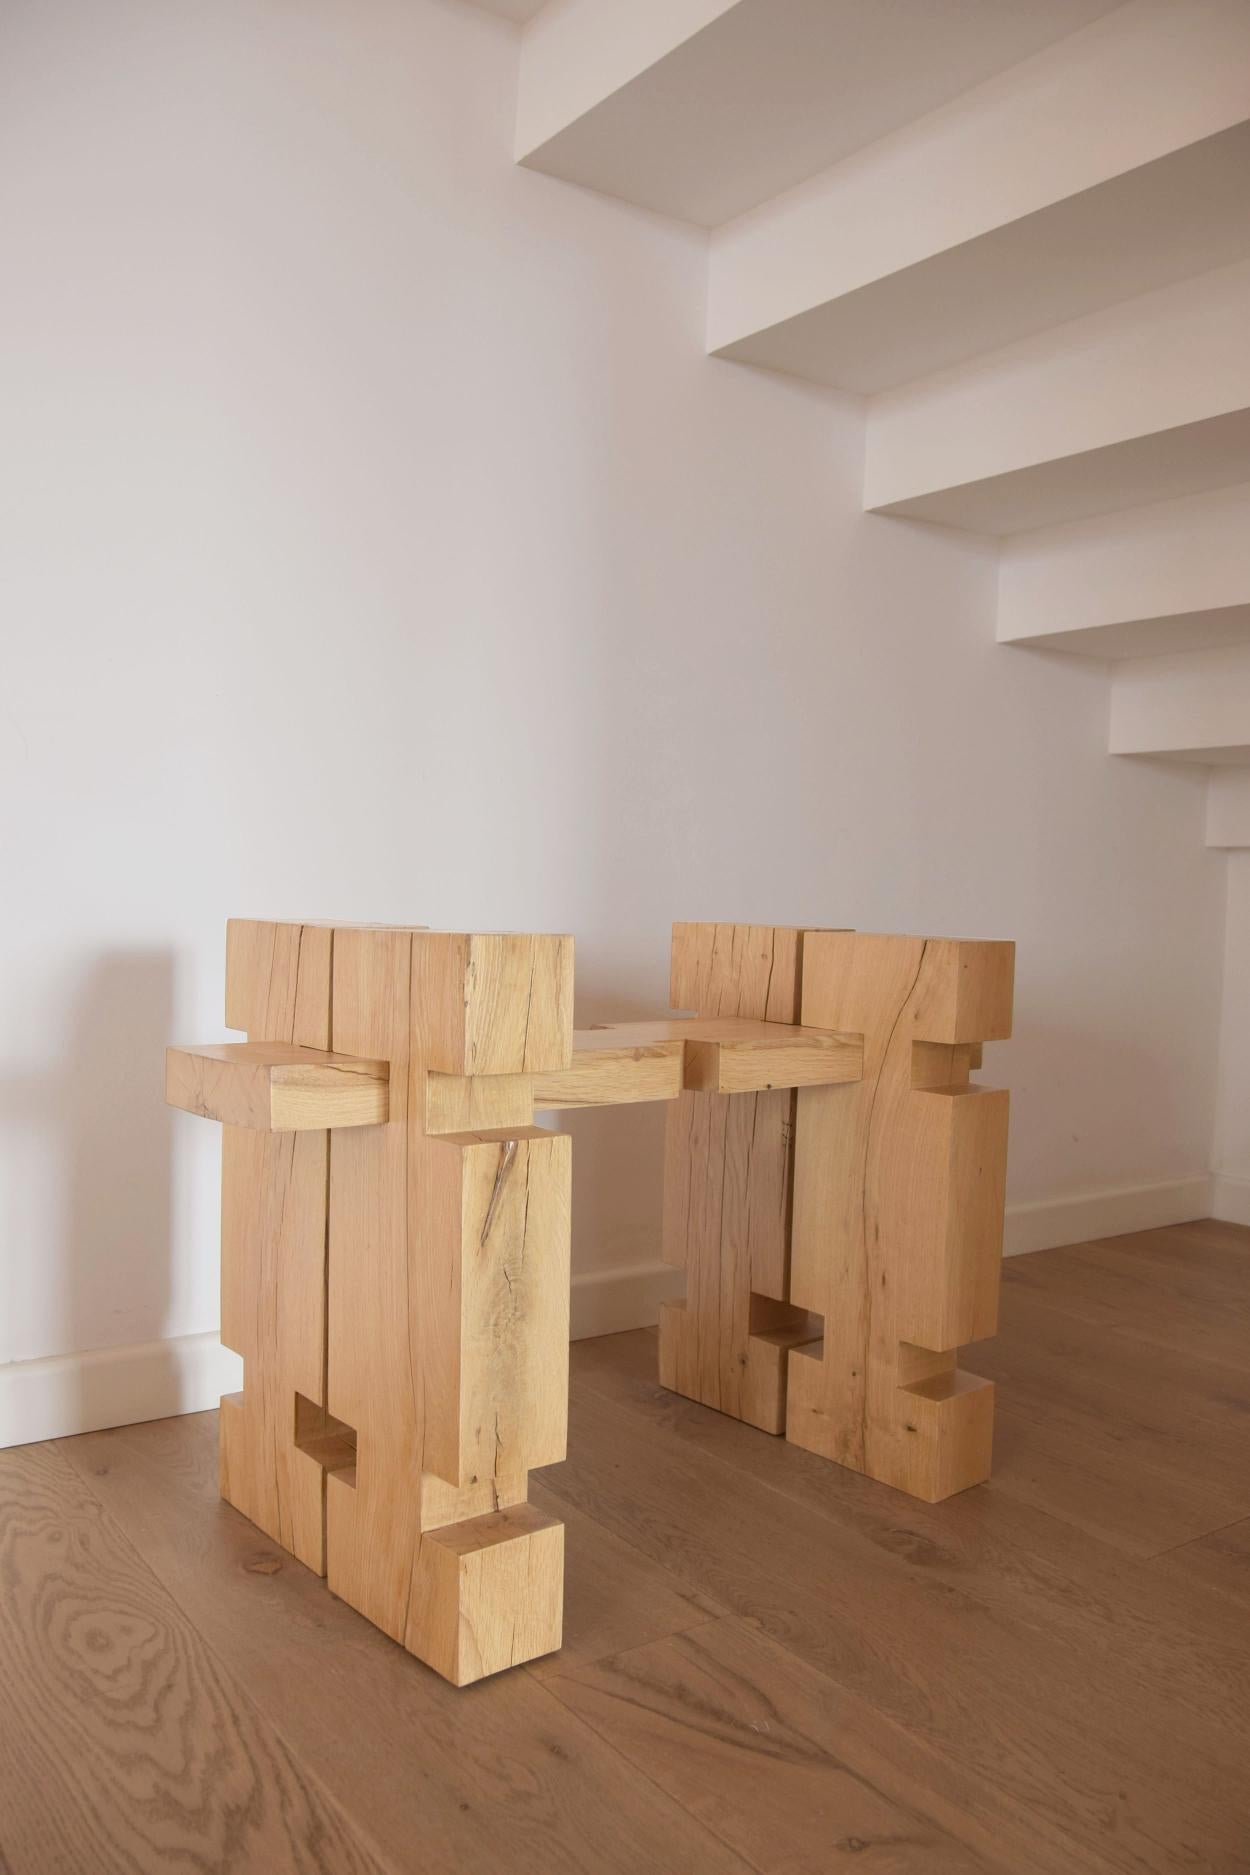 Element Bulk Stool by Nana Zaalishvili
Dimensions: W 85 x D 40 x H 55 cm
Materials: Century Old Oak

Made of solid oak, this 'Bulk' stool is one of the pieces of the ‘Element’ collection influenced by the Georgian Oda house and the architect Giorgi